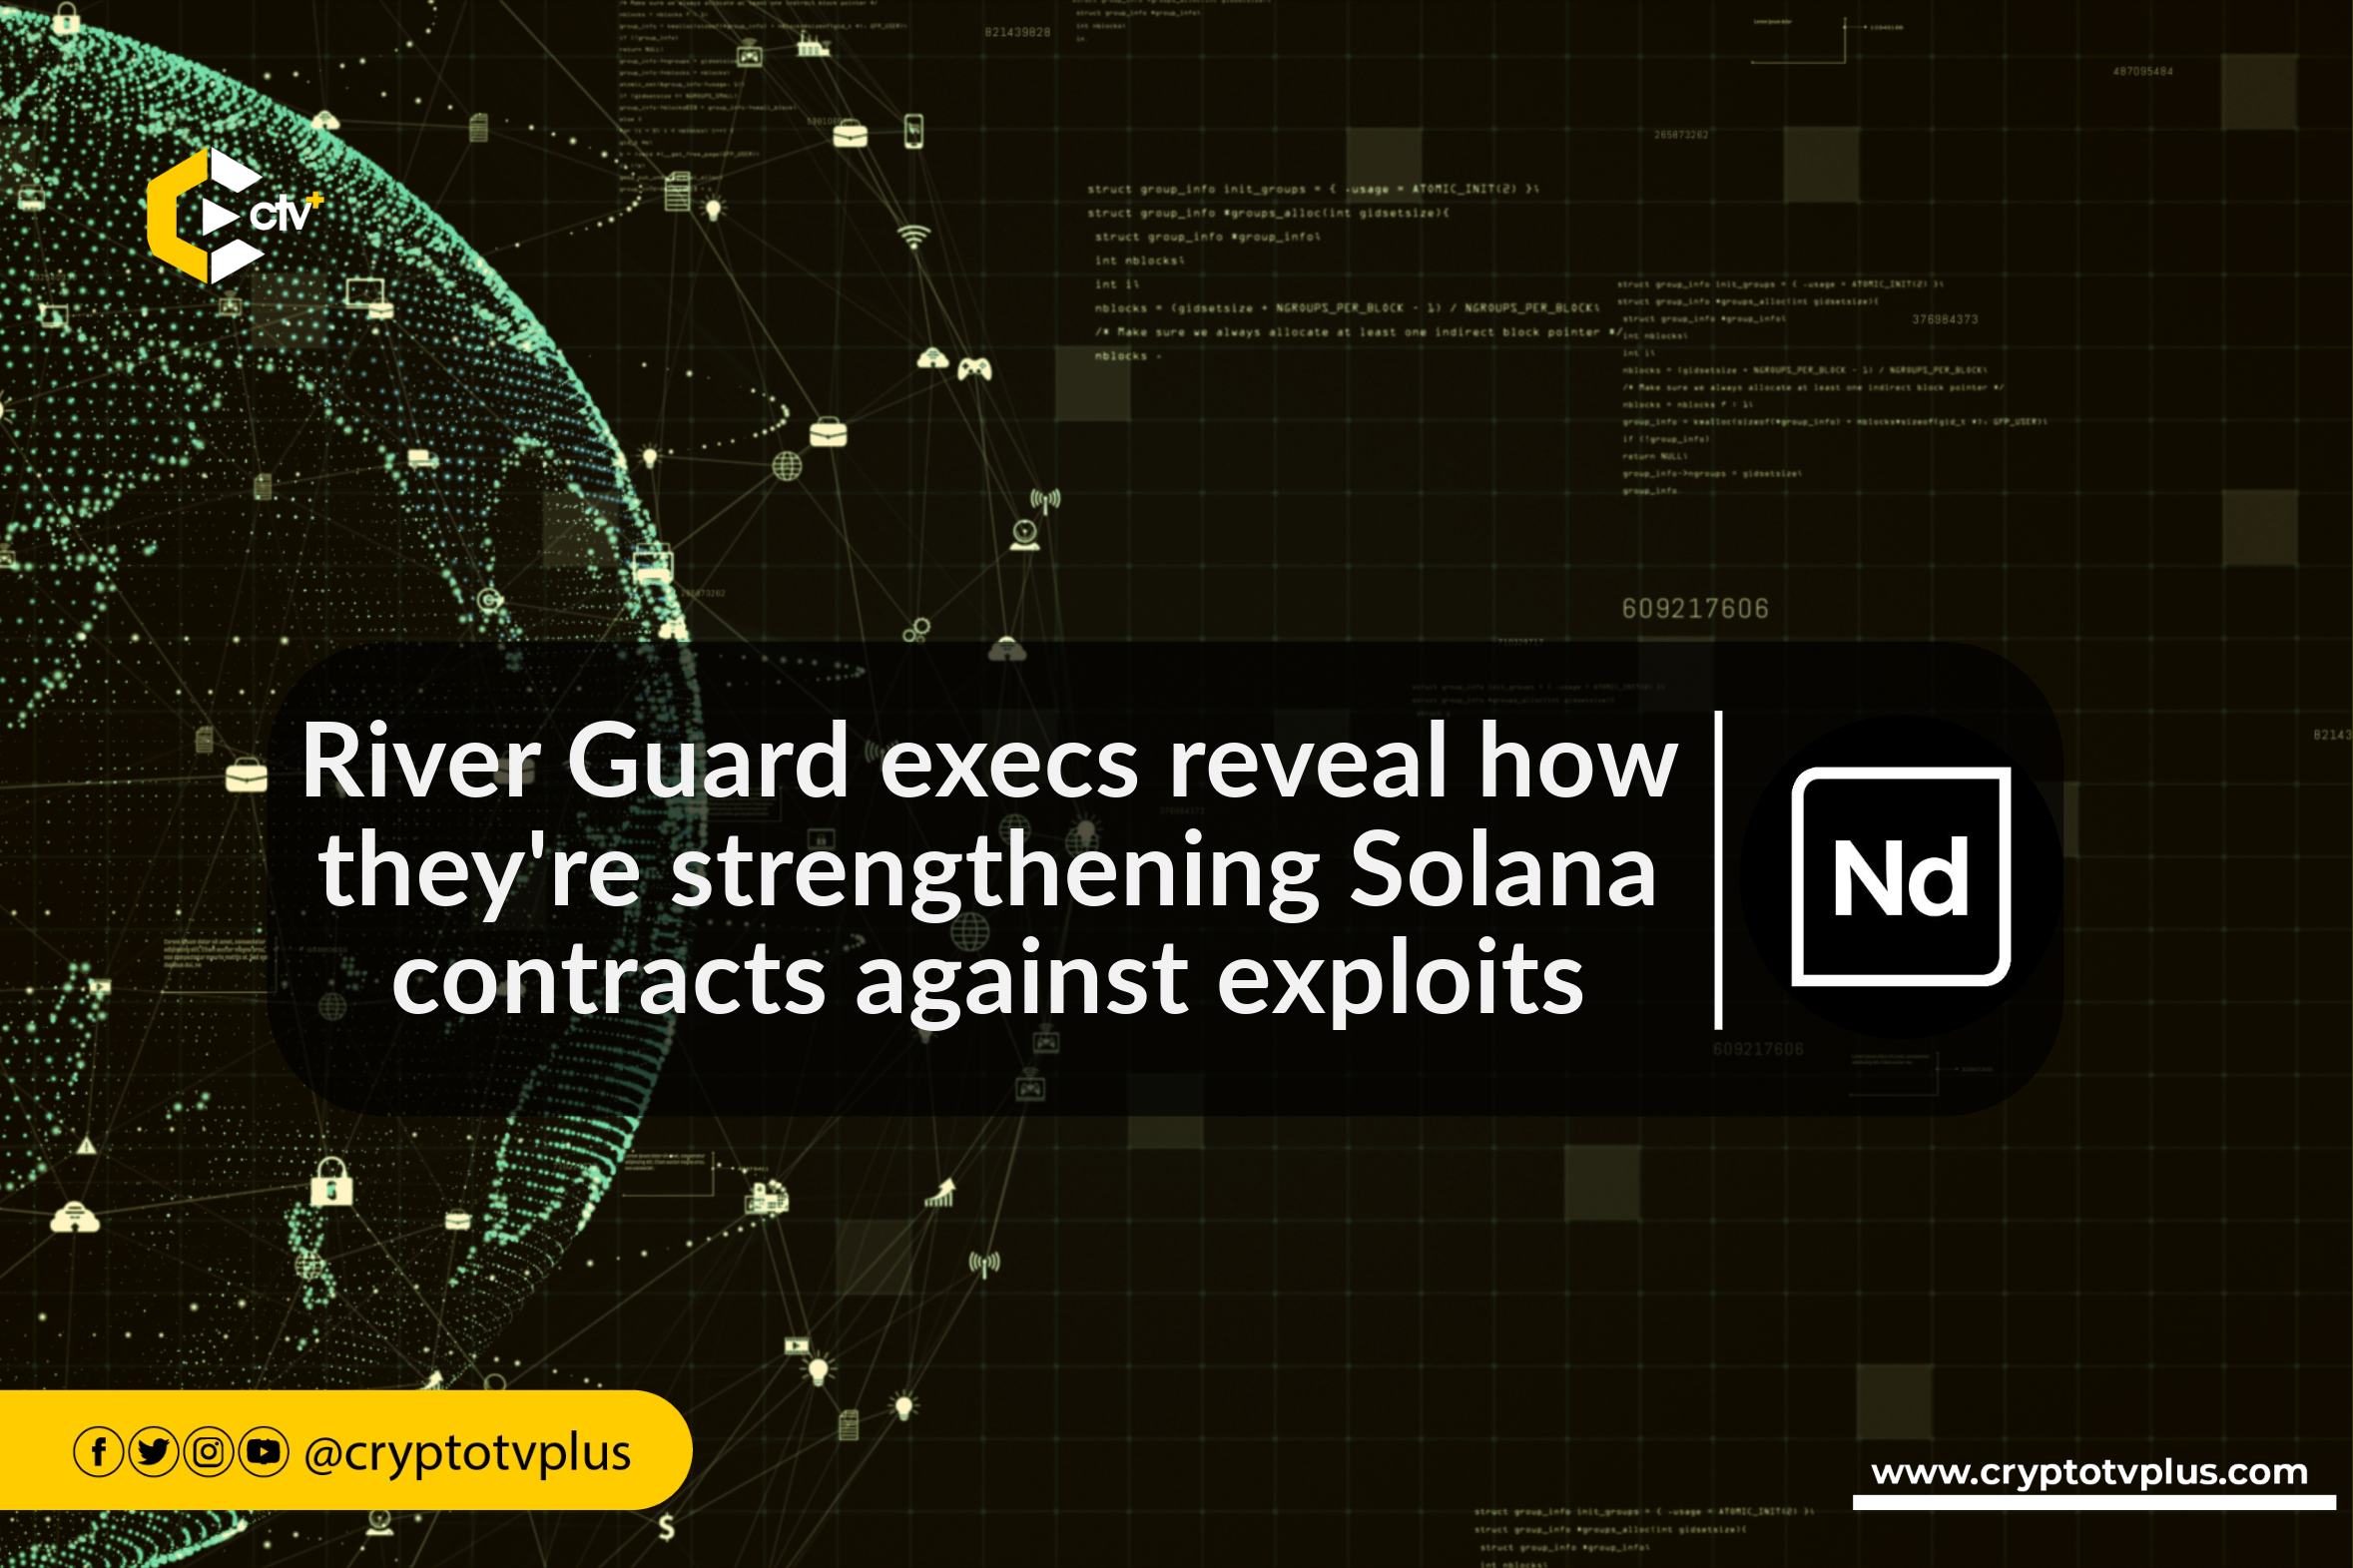 Neodyme's River Guard protocol boosts smart contract security on Solana by automating vulnerability detection and mitigation. Strong protection ensured.